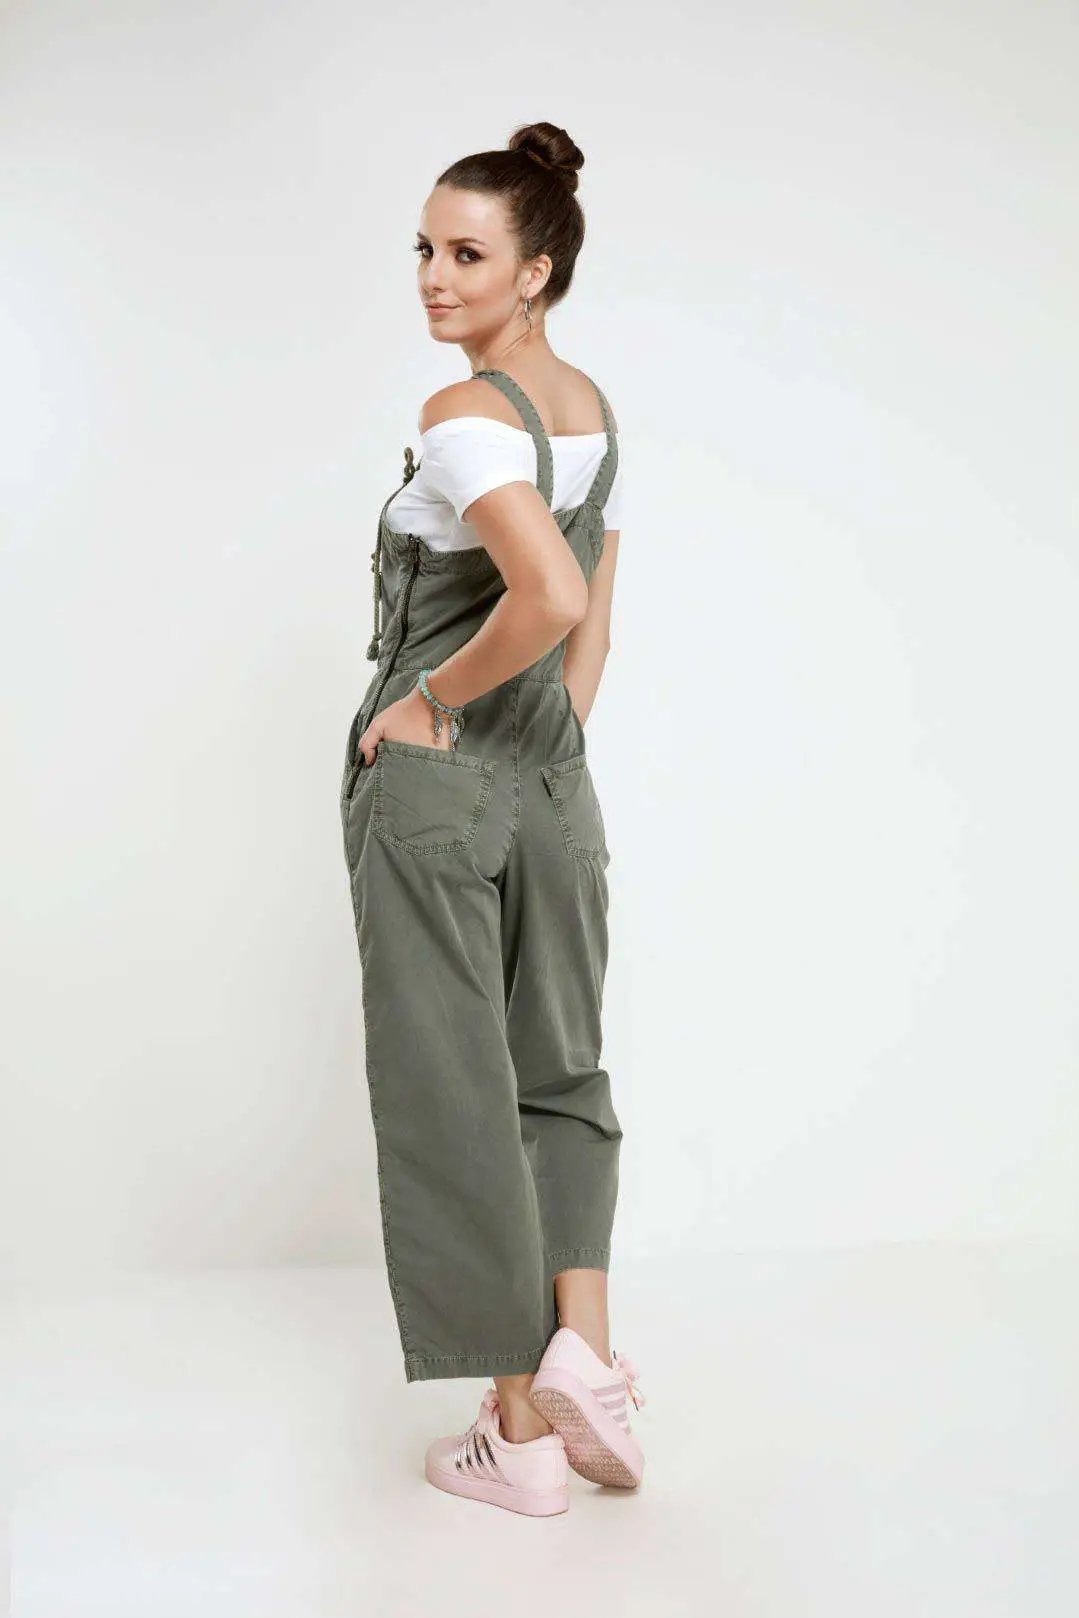 Strappy dungaree in olive